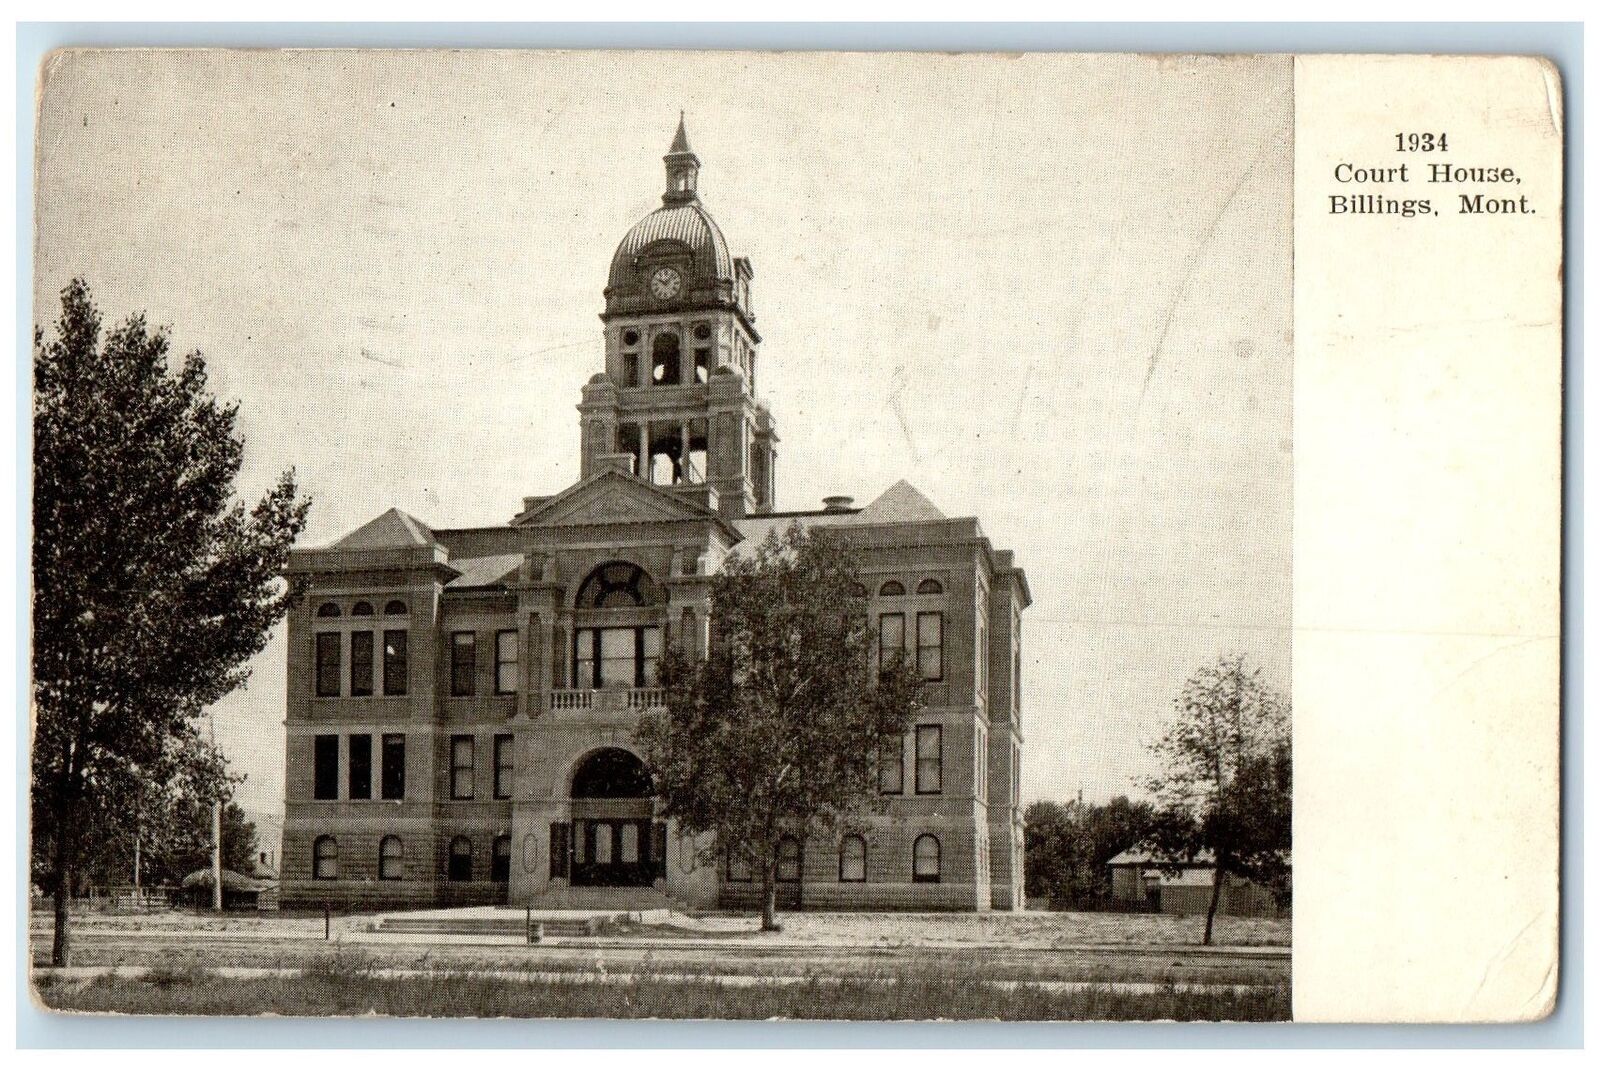 1908 Court House Exterior Roadside Billings Montana MT Posted Trees Postcard